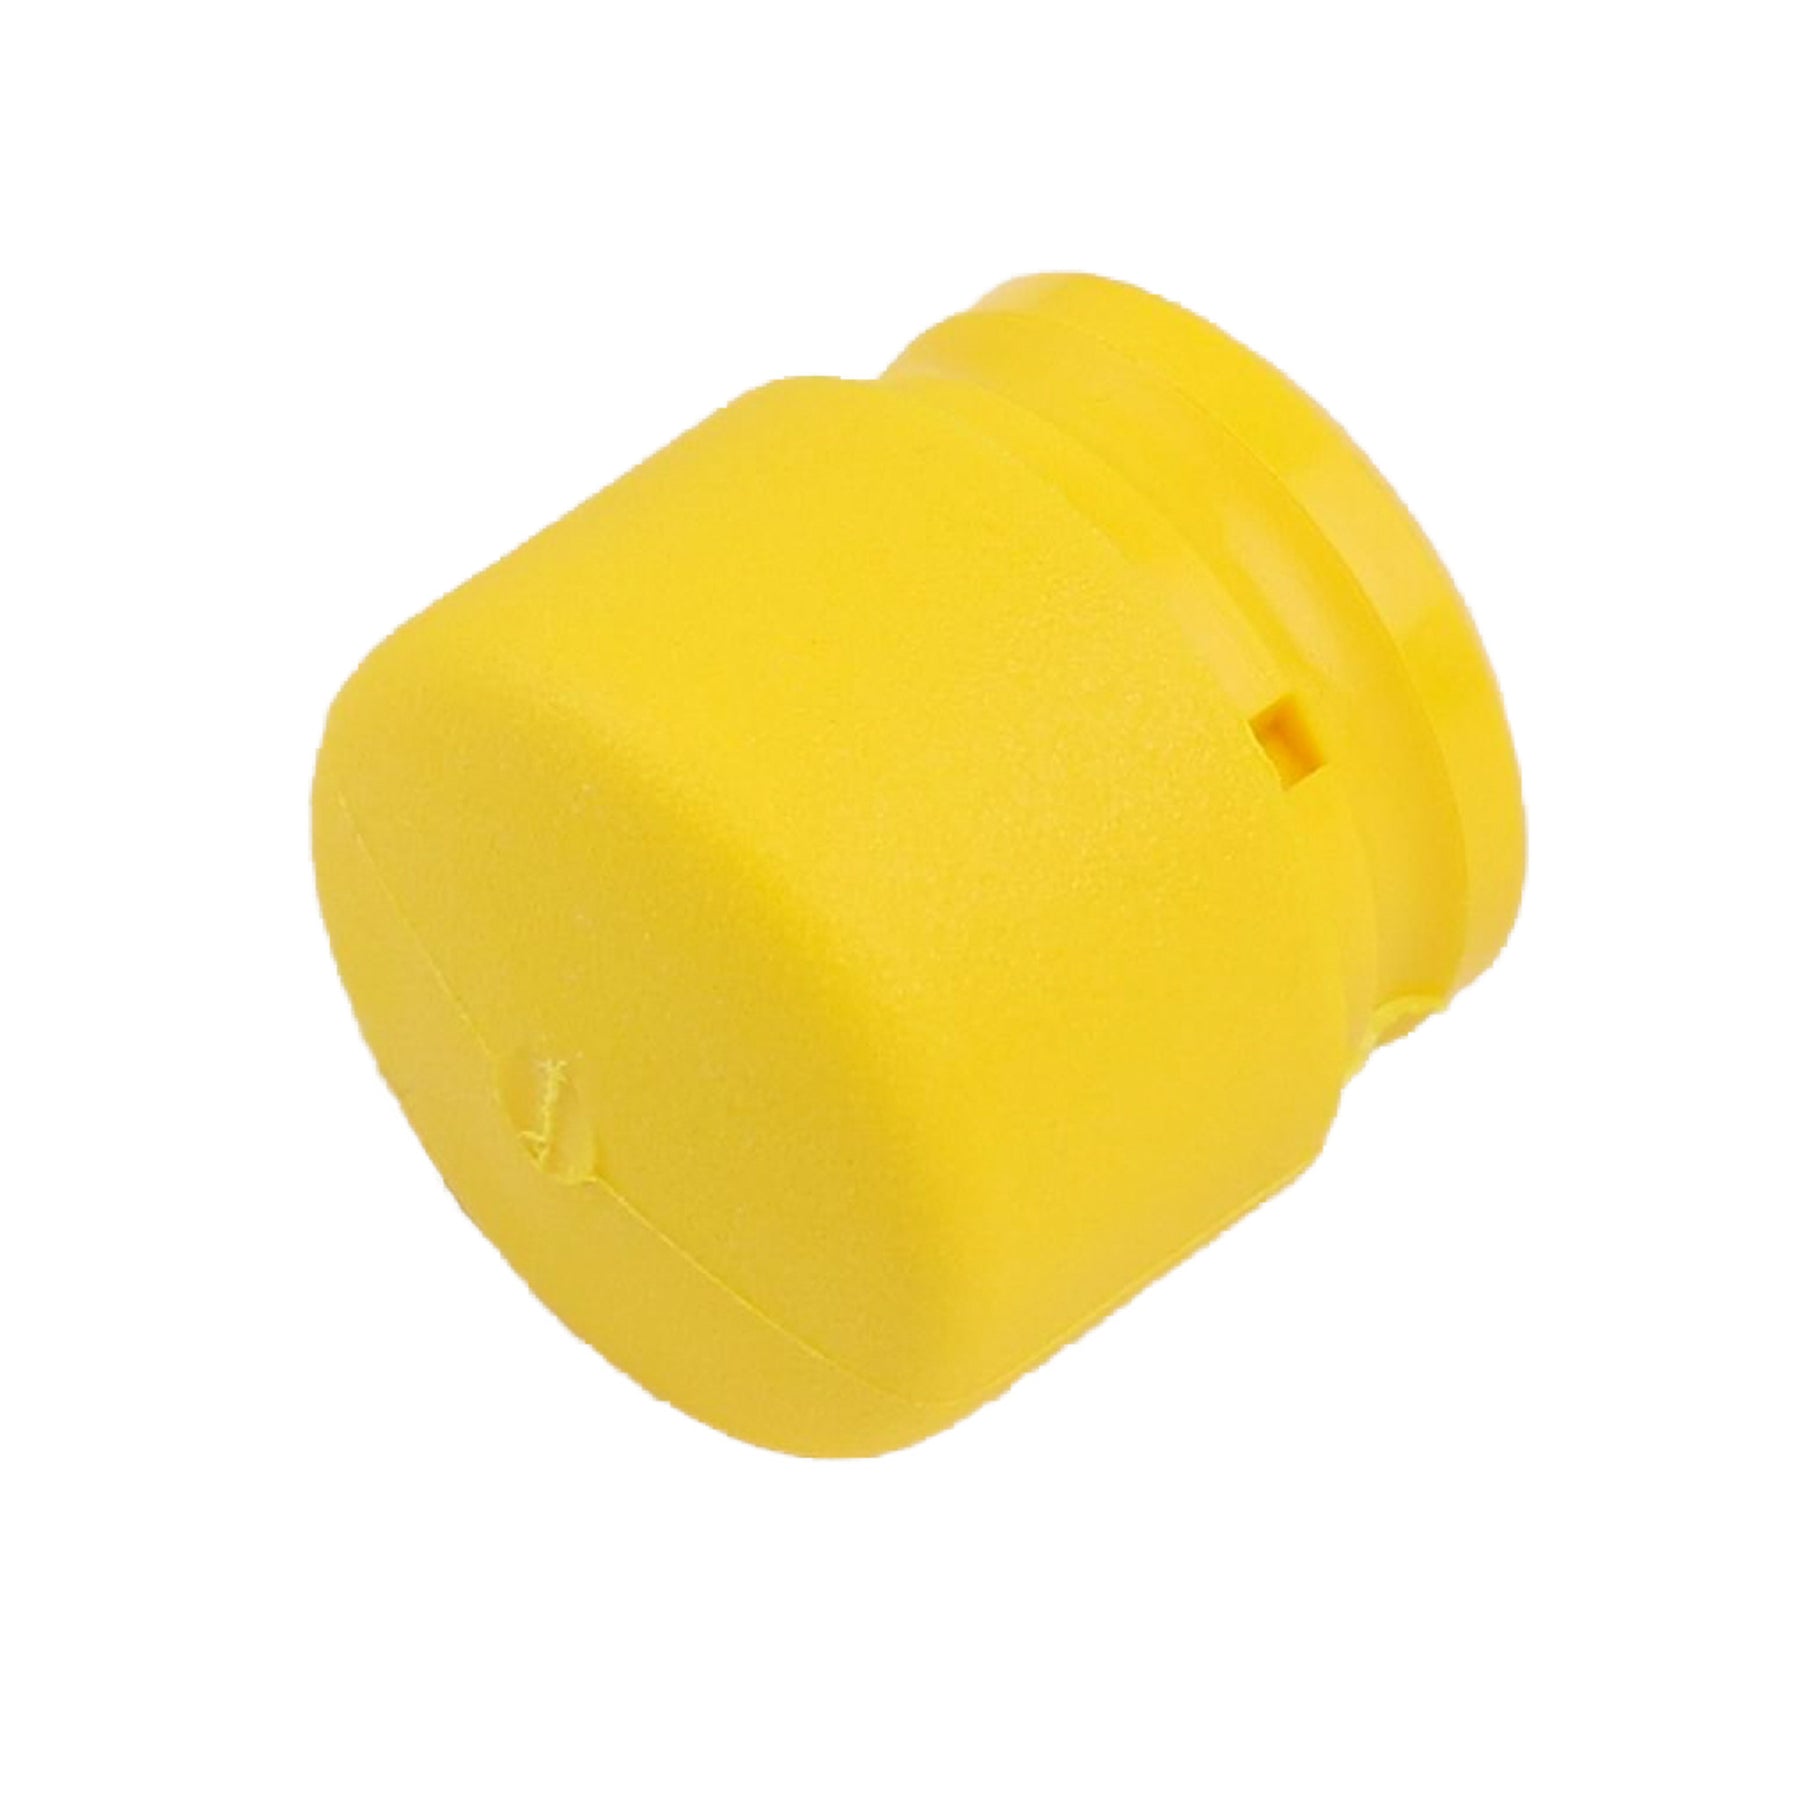 Wiha 80200 Hammer Replacement Face 1.0 Inch